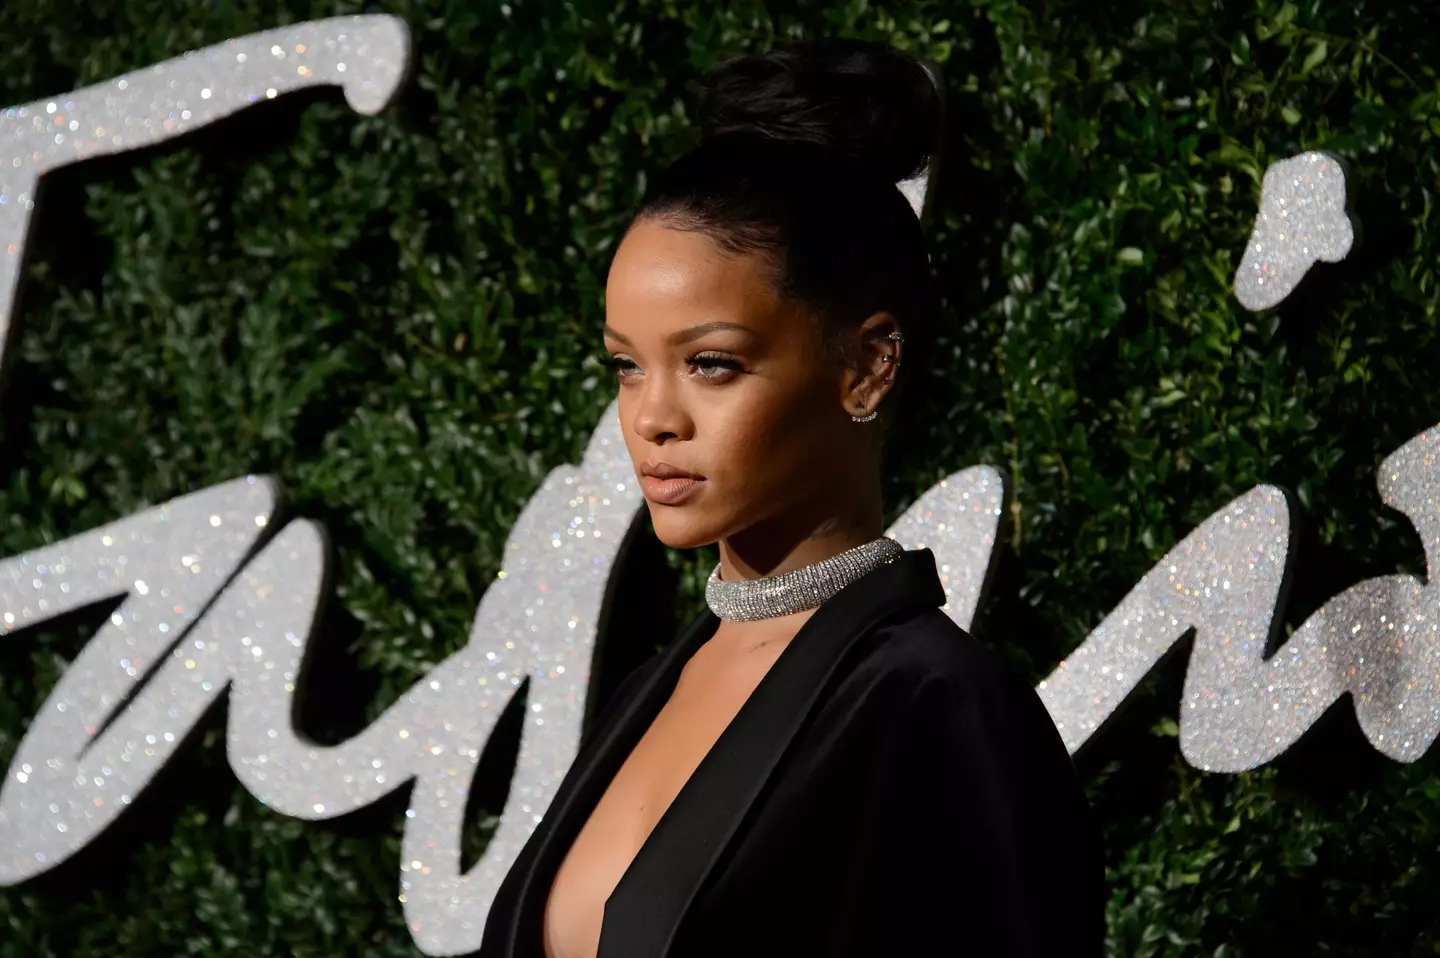 People admitted they had been saying Rihanna's name incorrectly.